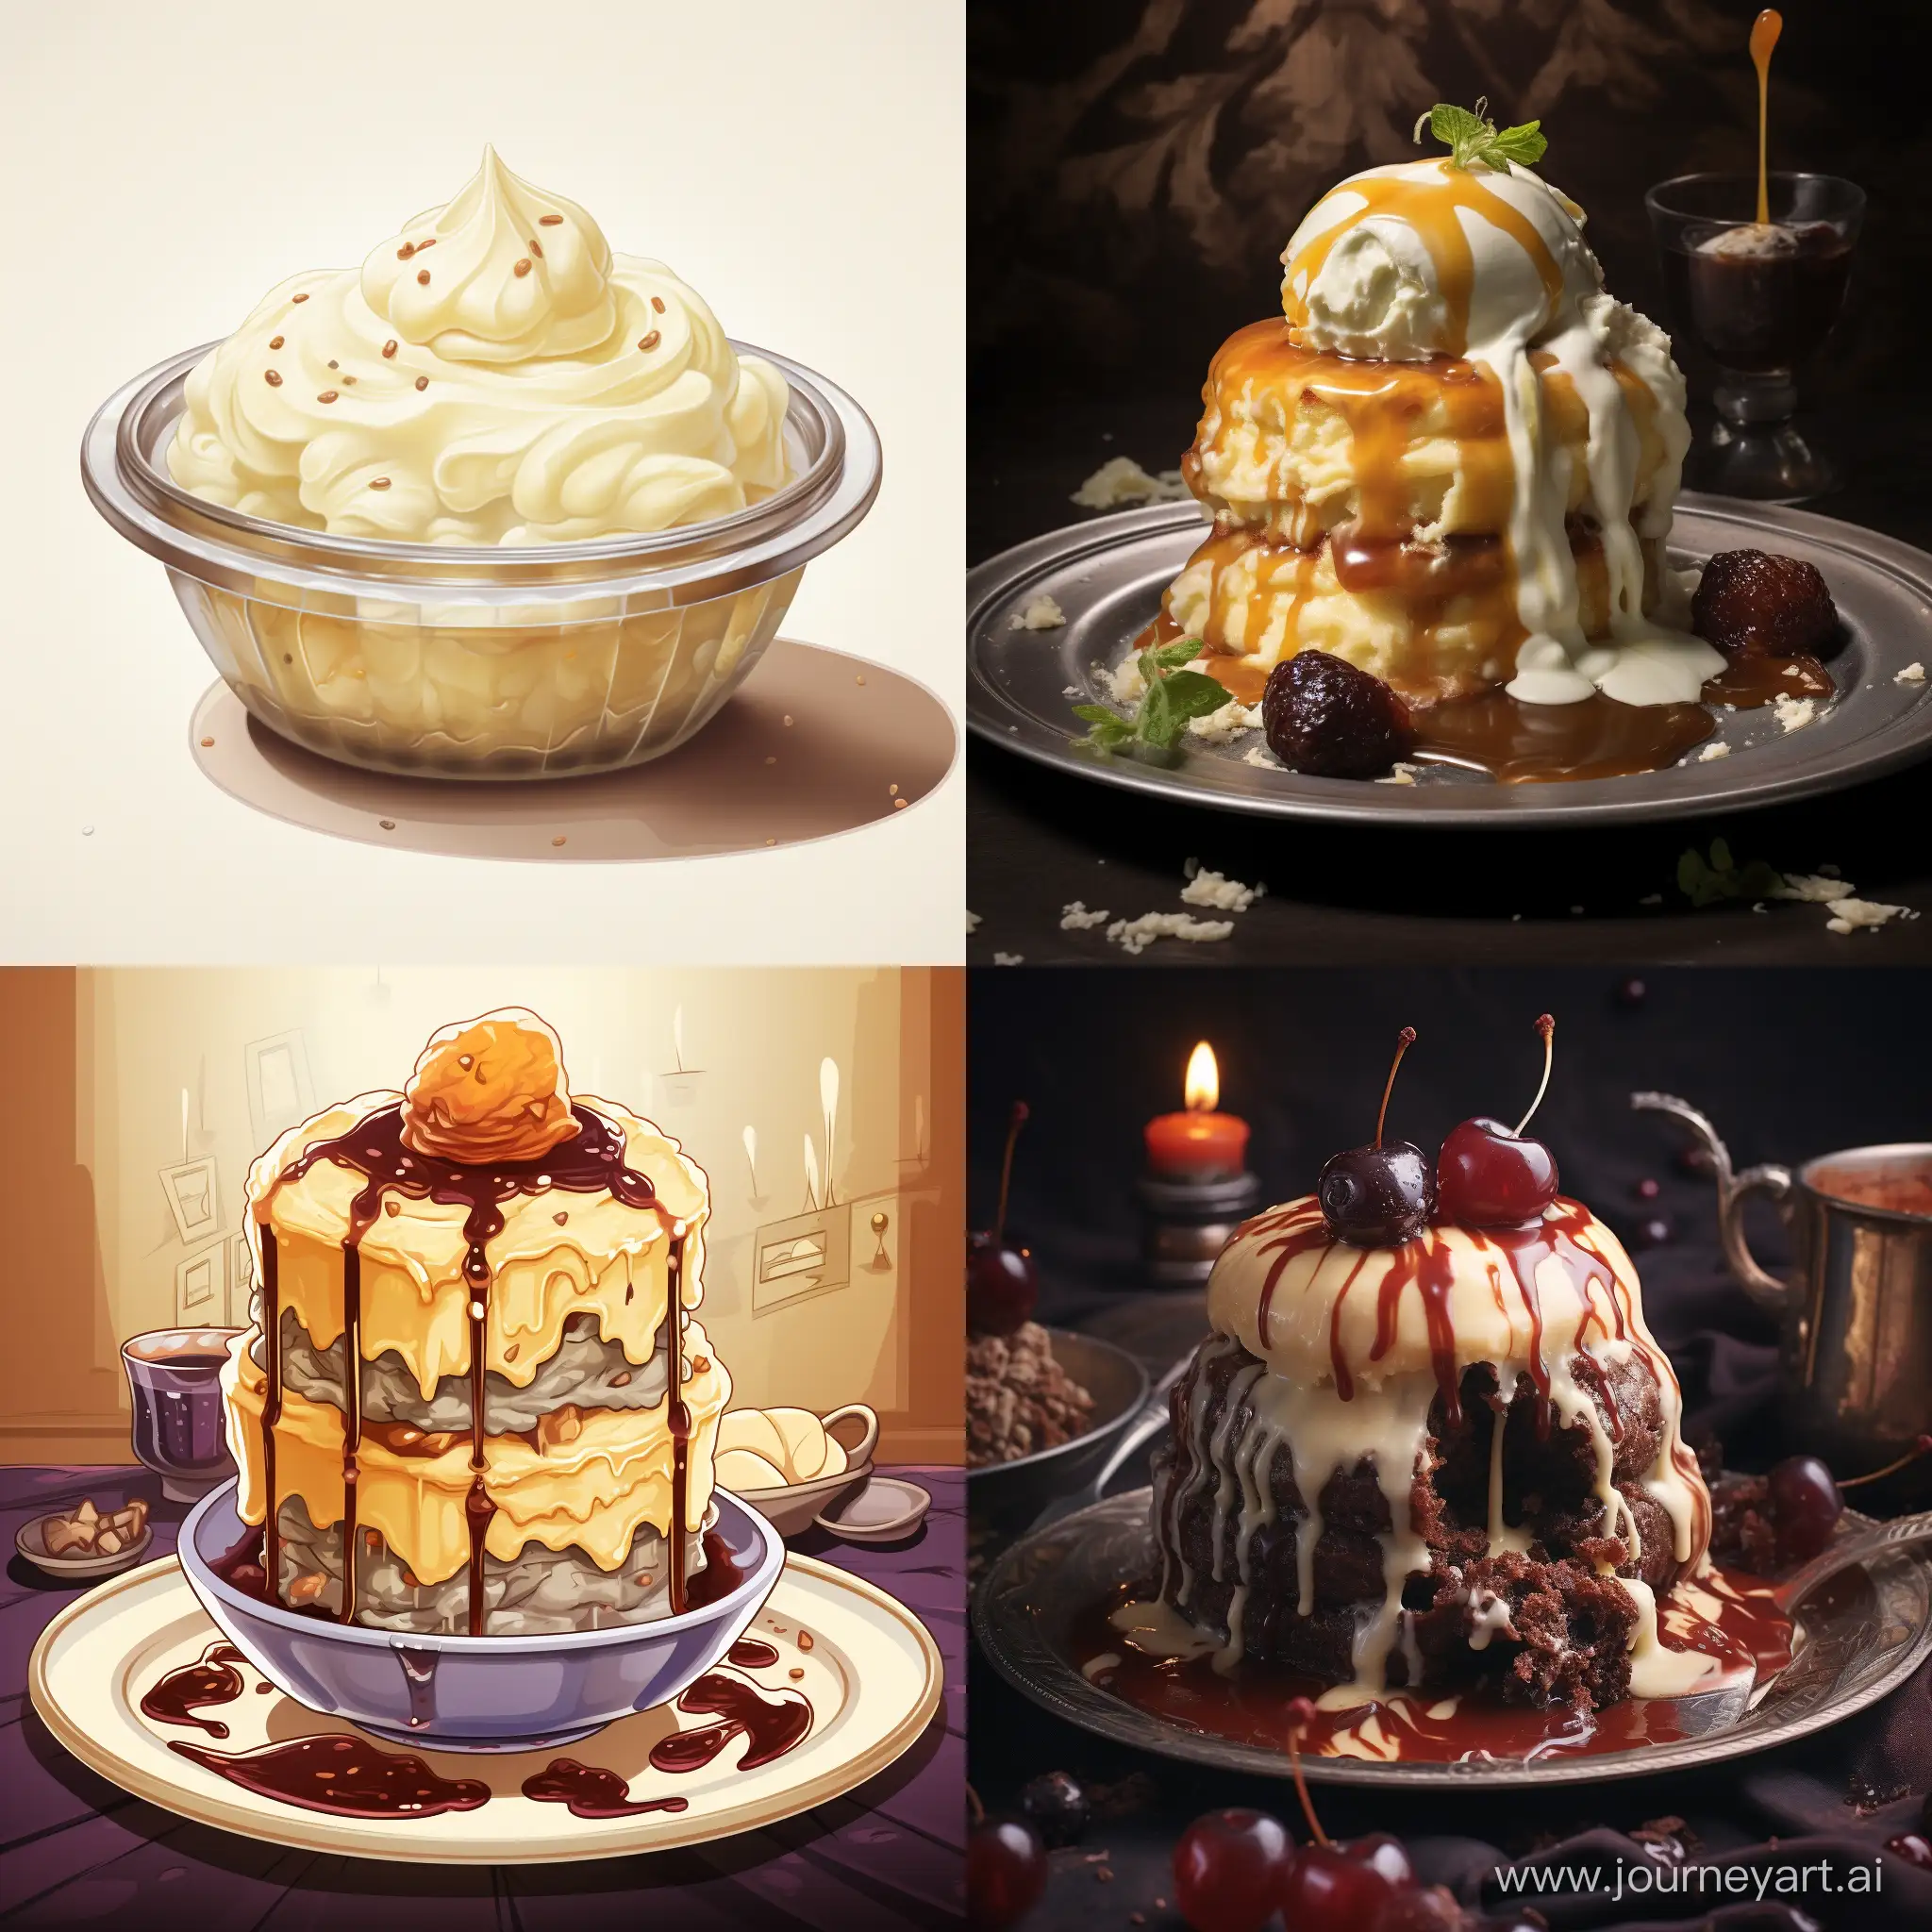 Delicious-Mashed-Pudding-Creation